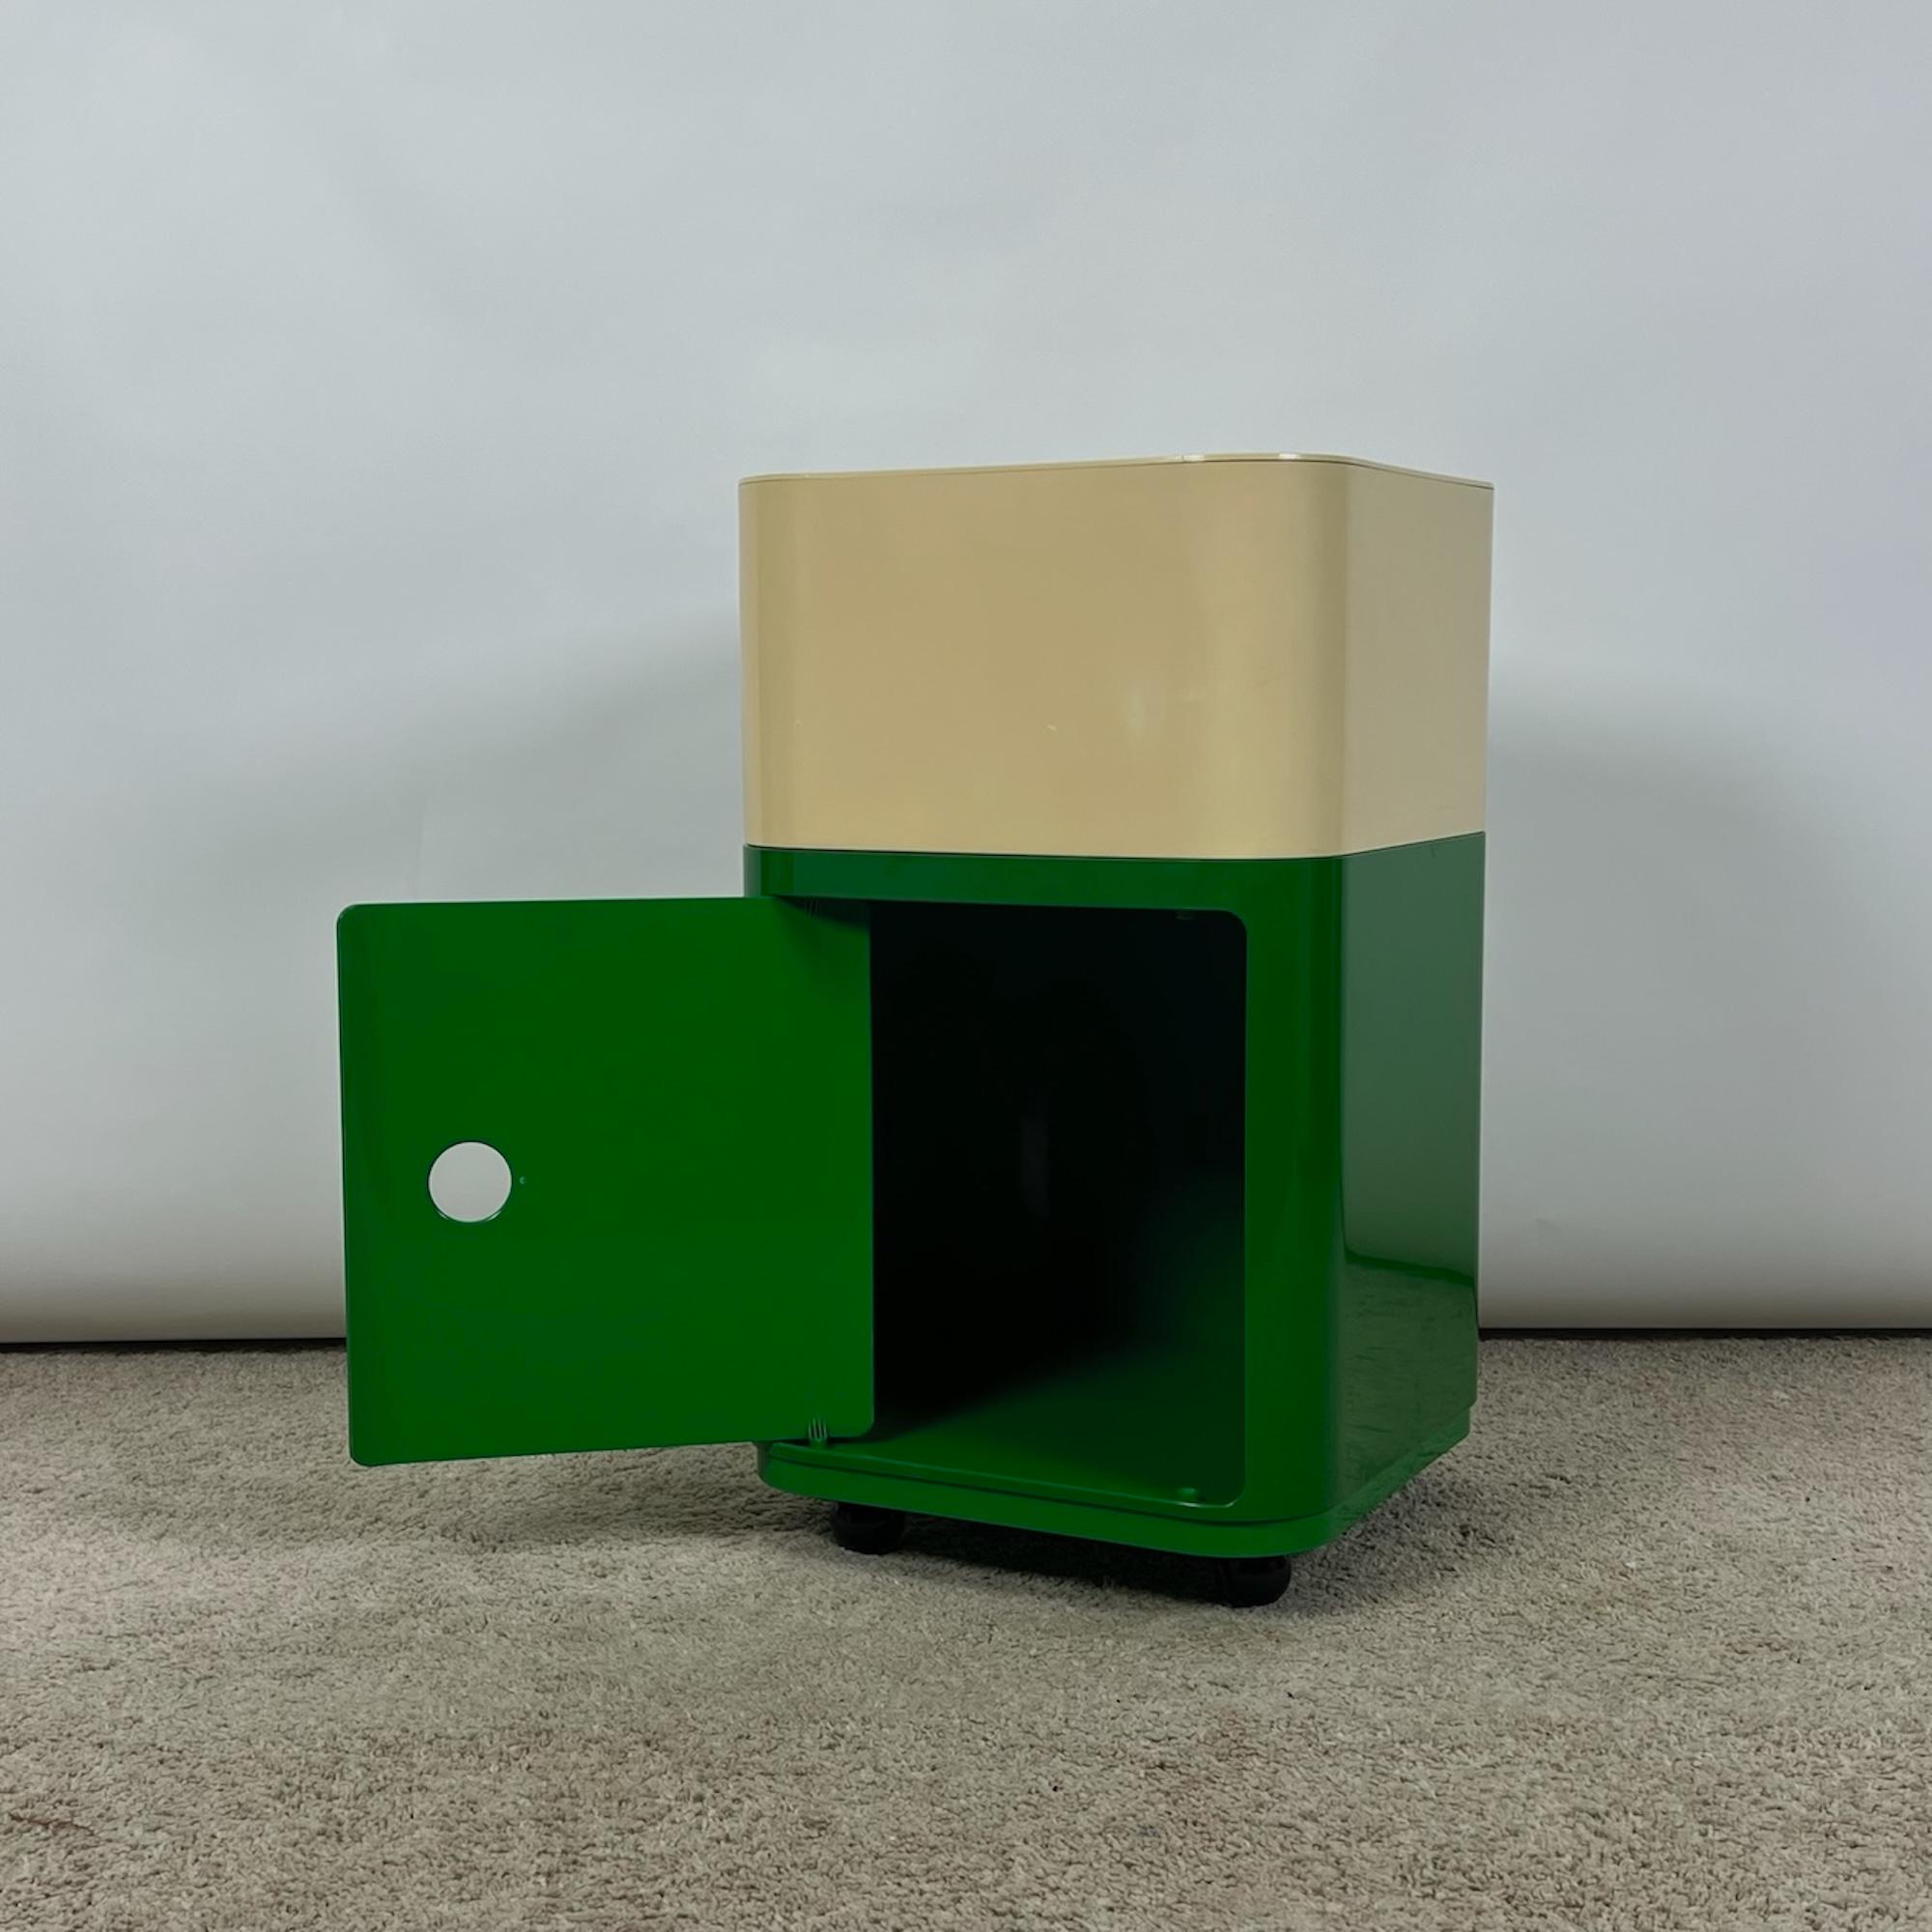 Minimalist Kartell 'Componibili' Square Based Cabinet Modules in green and white, 1960s For Sale